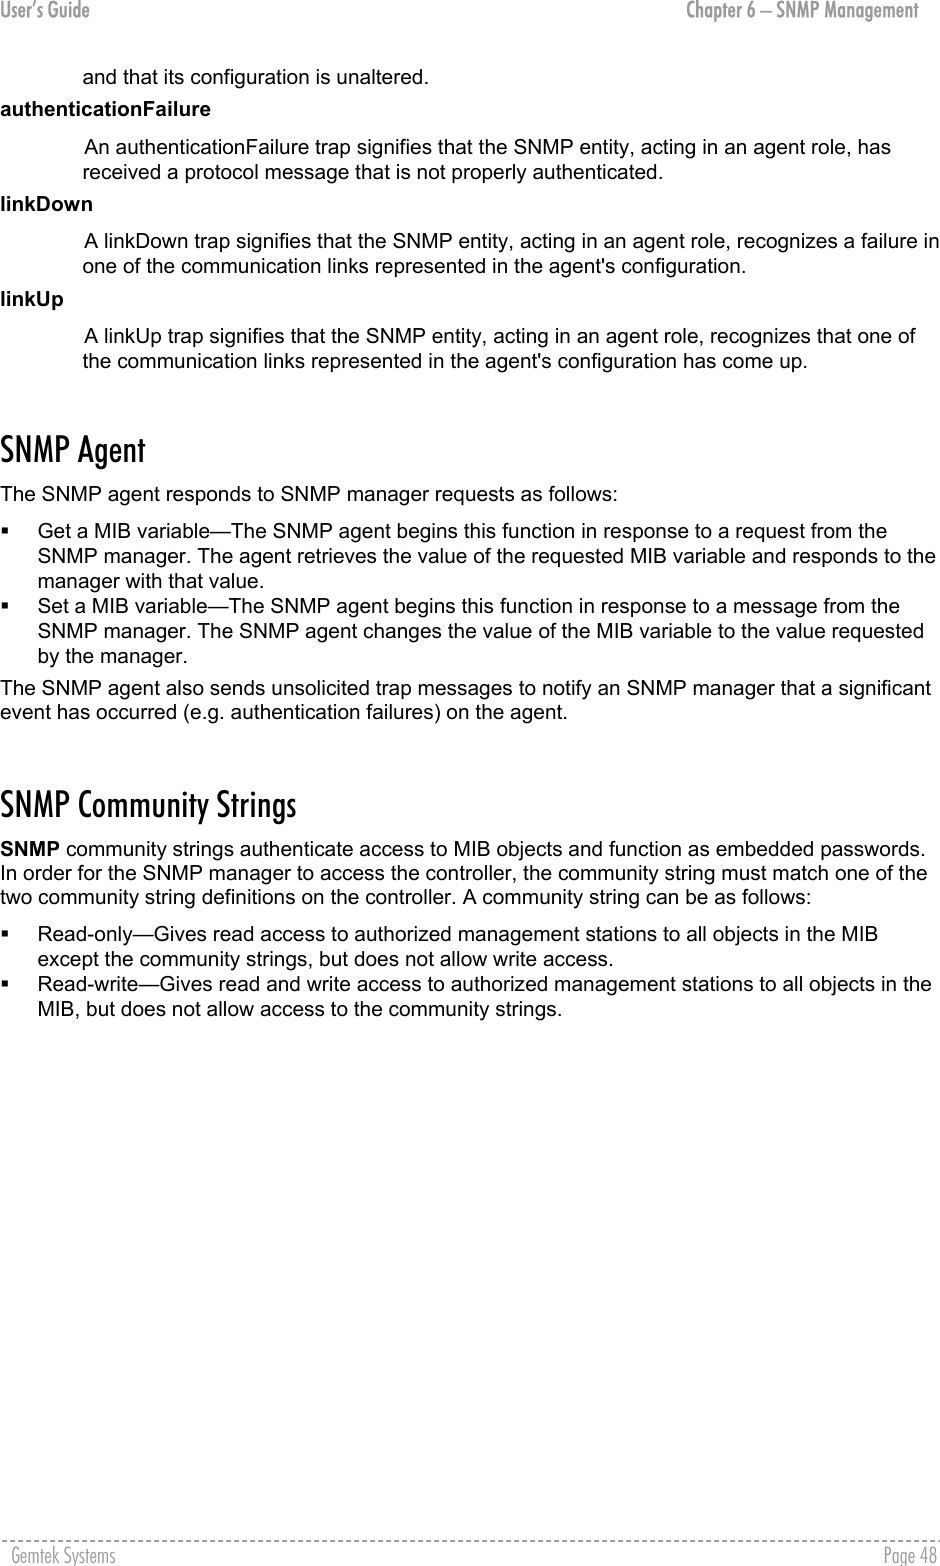 User’s Guide  Chapter 6 – SNMP Management and that its configuration is unaltered. authenticationFailure An authenticationFailure trap signifies that the SNMP entity, acting in an agent role, has received a protocol message that is not properly authenticated. linkDown A linkDown trap signifies that the SNMP entity, acting in an agent role, recognizes a failure in one of the communication links represented in the agent&apos;s configuration. linkUp A linkUp trap signifies that the SNMP entity, acting in an agent role, recognizes that one of the communication links represented in the agent&apos;s configuration has come up.  SNMP Agent The SNMP agent responds to SNMP manager requests as follows:   Get a MIB variable—The SNMP agent begins this function in response to a request from the SNMP manager. The agent retrieves the value of the requested MIB variable and responds to the manager with that value.   Set a MIB variable—The SNMP agent begins this function in response to a message from the SNMP manager. The SNMP agent changes the value of the MIB variable to the value requested by the manager. The SNMP agent also sends unsolicited trap messages to notify an SNMP manager that a significant event has occurred (e.g. authentication failures) on the agent.  SNMP Community Strings SNMP community strings authenticate access to MIB objects and function as embedded passwords. In order for the SNMP manager to access the controller, the community string must match one of the two community string definitions on the controller. A community string can be as follows:   Read-only—Gives read access to authorized management stations to all objects in the MIB except the community strings, but does not allow write access.   Read-write—Gives read and write access to authorized management stations to all objects in the MIB, but does not allow access to the community strings. Gemtek Systems    Page 48  